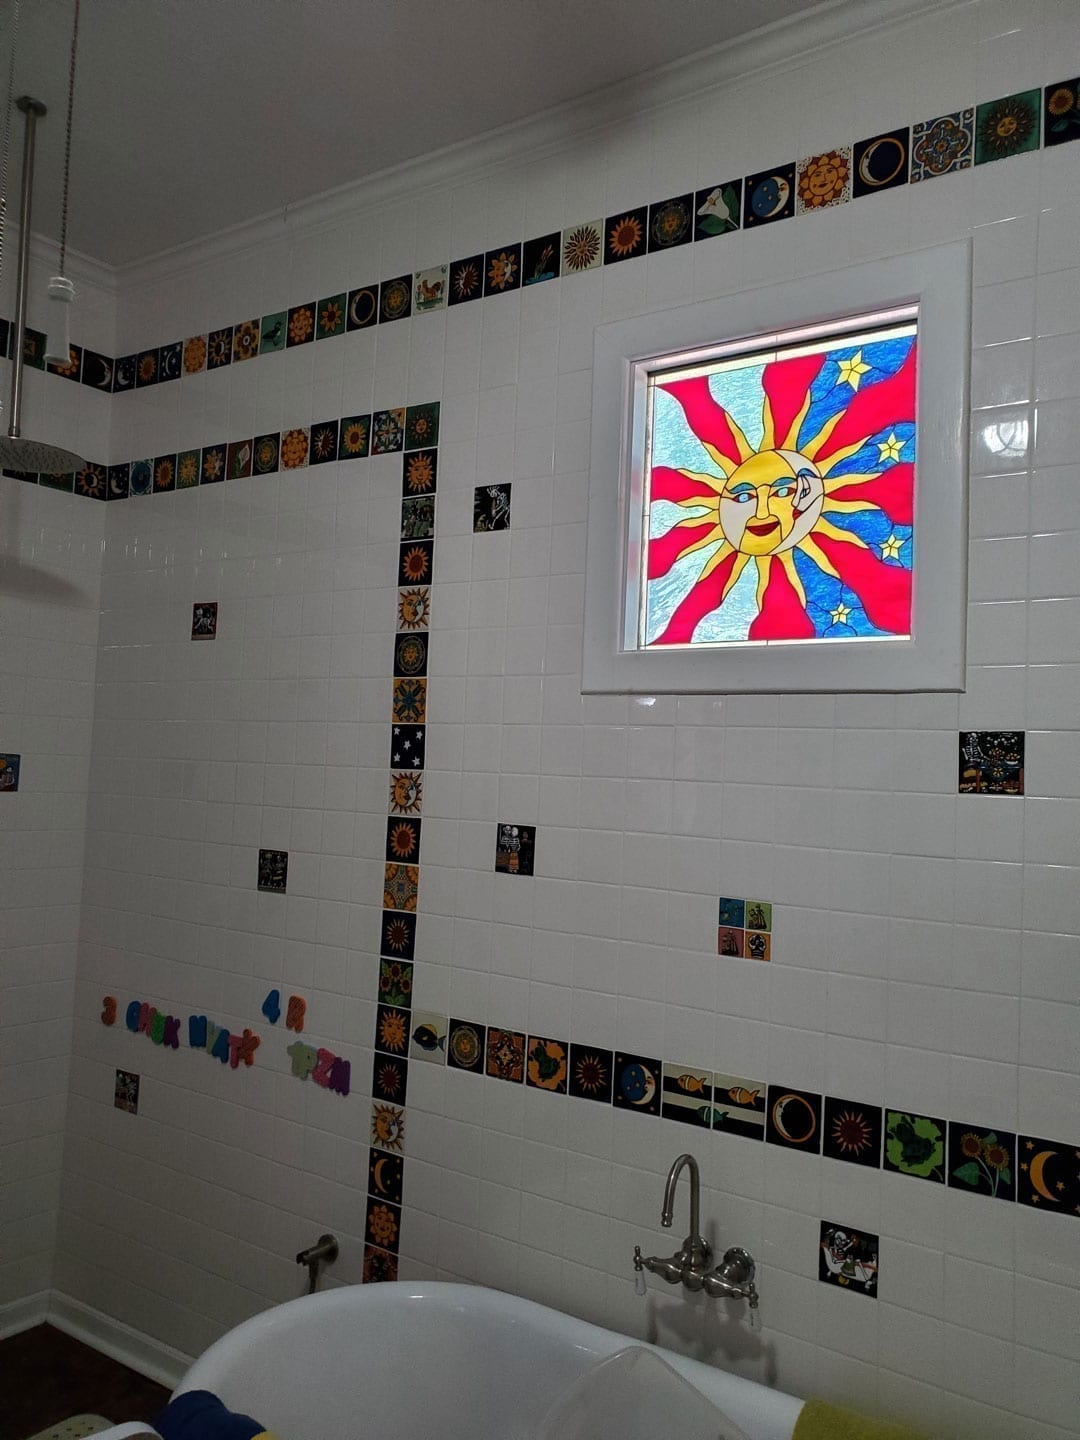 Sun & Moon Stained Glass installed in a bathroom window